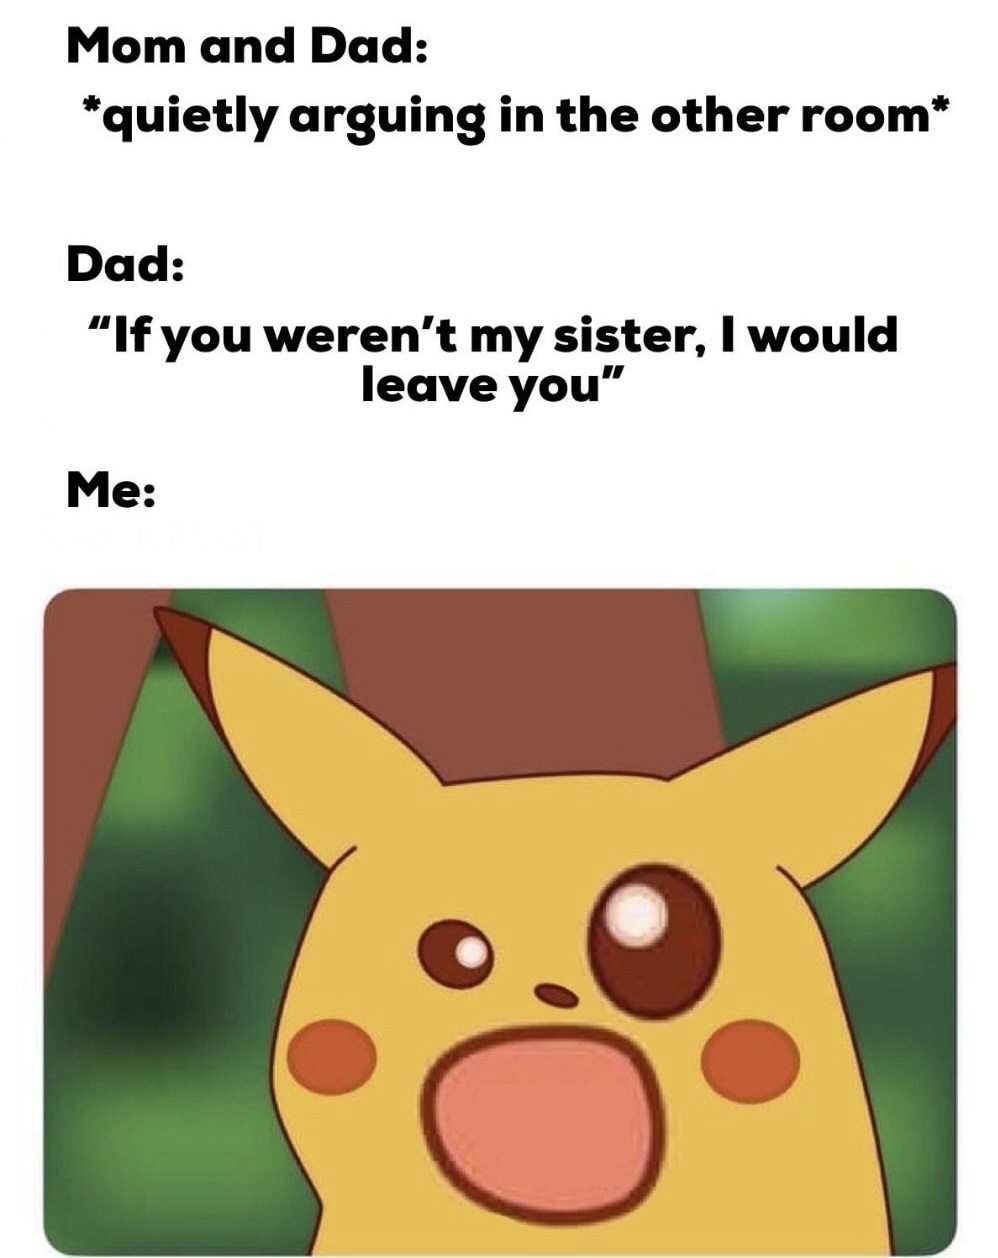 memes - pikachu memes - Mom and Dad quietly arguing in the other room Dad "If you weren't my sister, I would leave you" Me